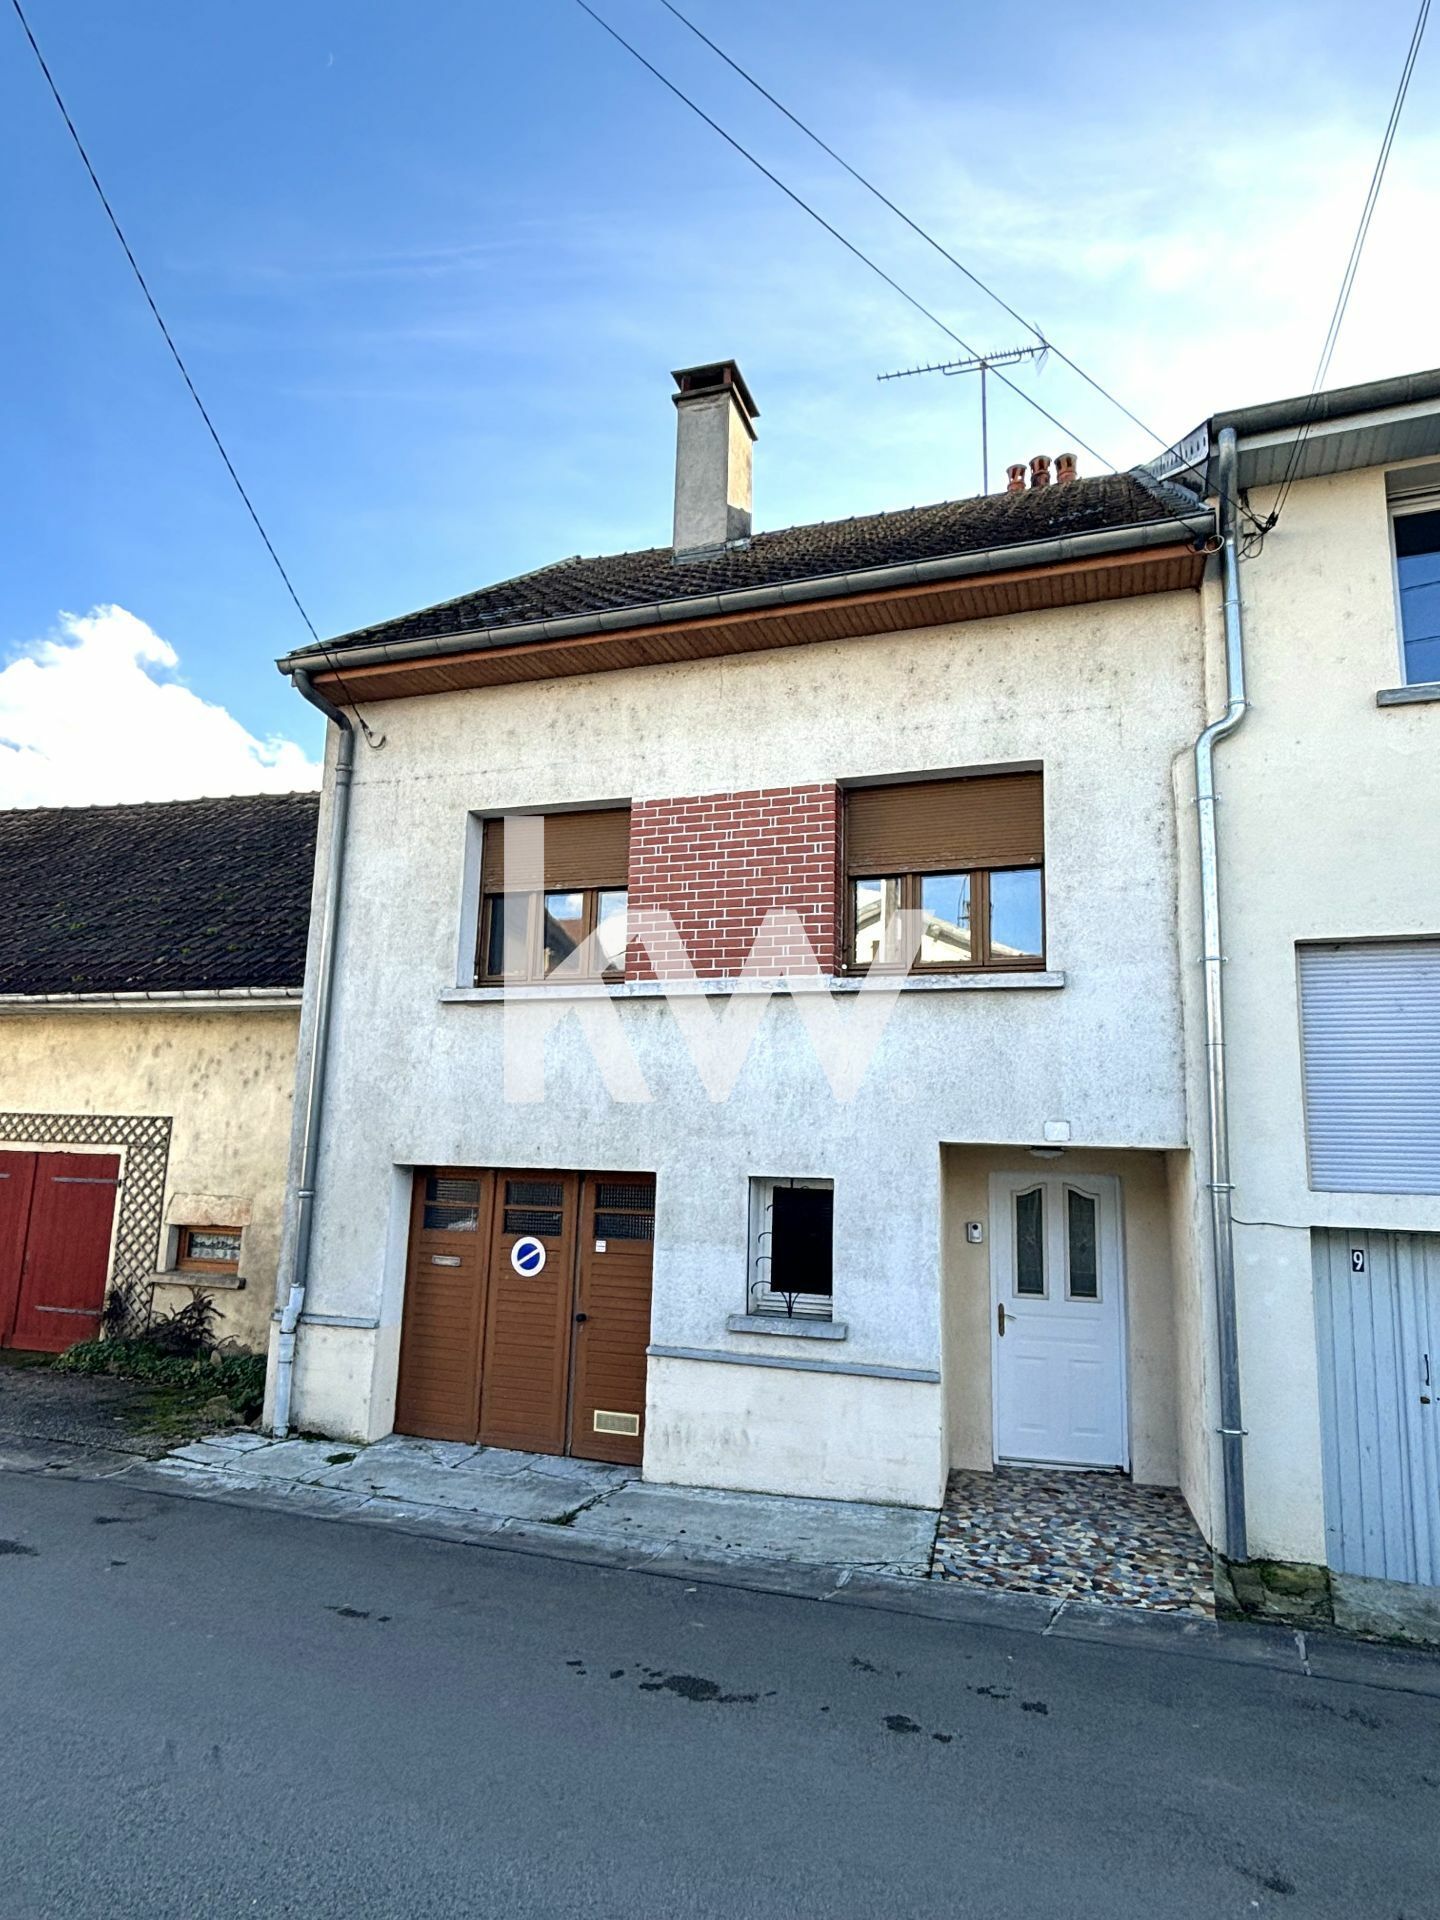 Maison 5 pièces 84 m² Marnay